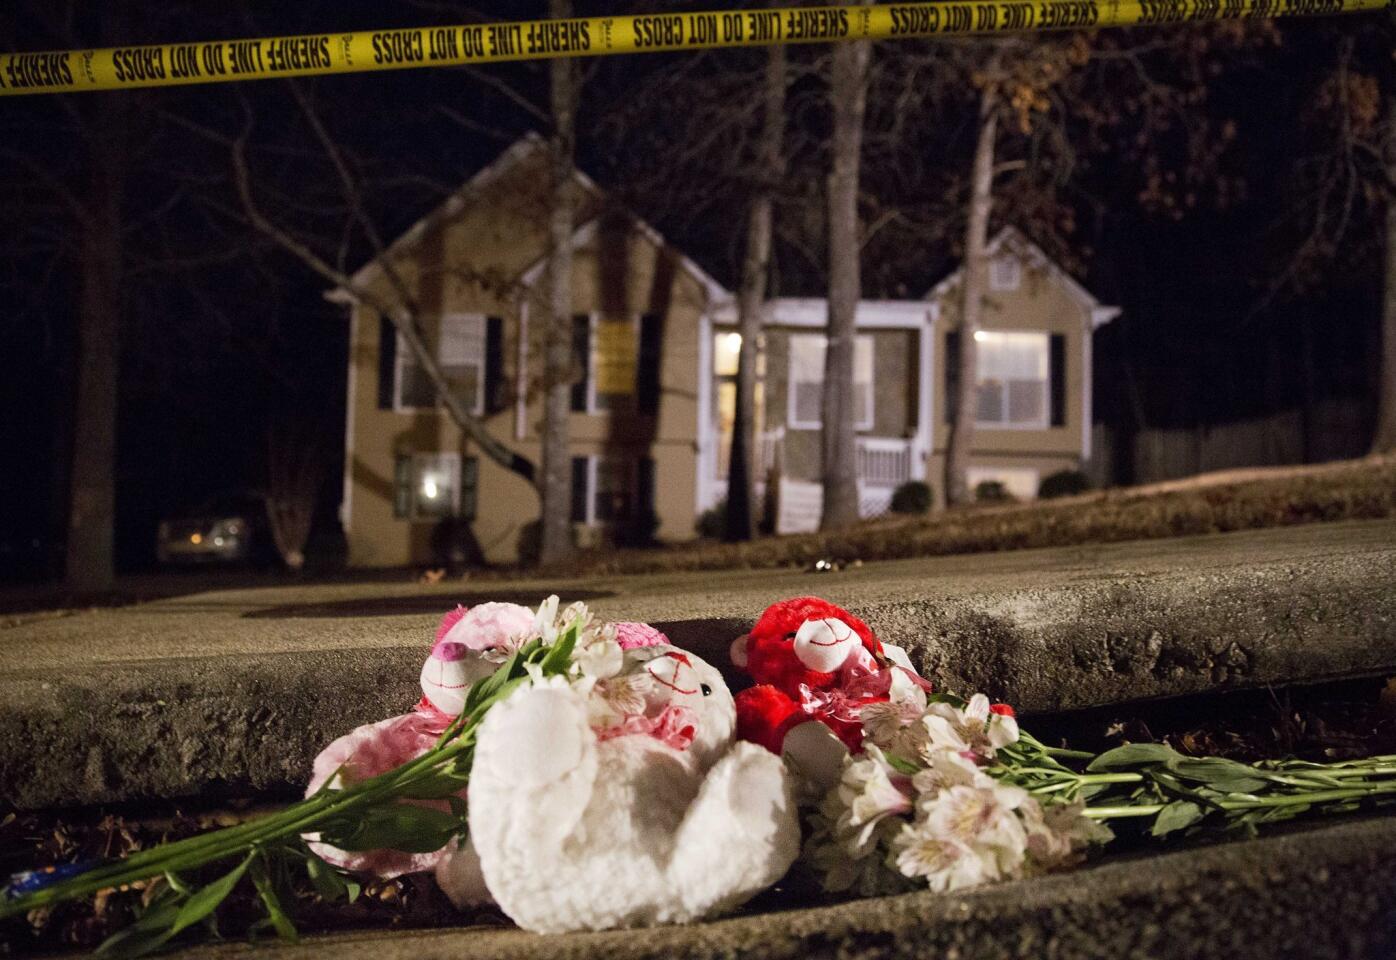 Flowers and teddy bears lay on the street outside the home of a shooting scene where authorities say five people are dead, including the gunman, in Douglasville, Ga. on Saturday, Feb. 7, 2015. Douglas County Sheriff's Lt. Glenn Daniel said the gunman shot six people before fatally shooting himself, and the two surviving victims are children, but children are also among the dead.